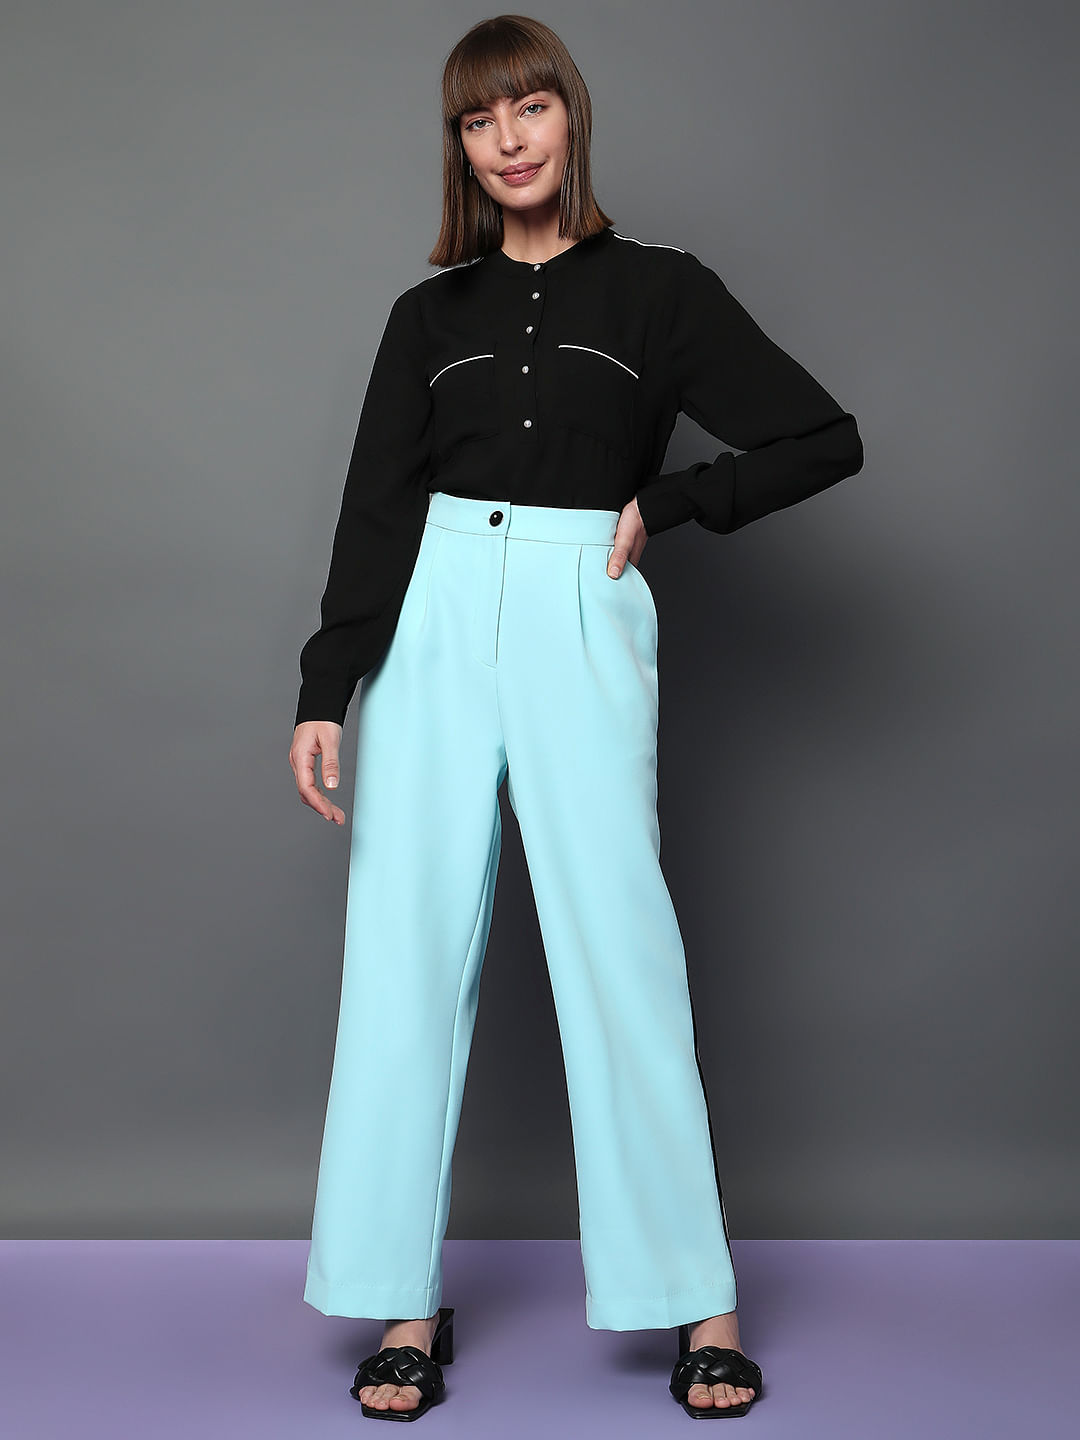 Bishop Sleeve Bodysuit + High Waist Pants (Style Pantry) | Bright colored  outfits, Blue pants outfit, Dress pants outfits